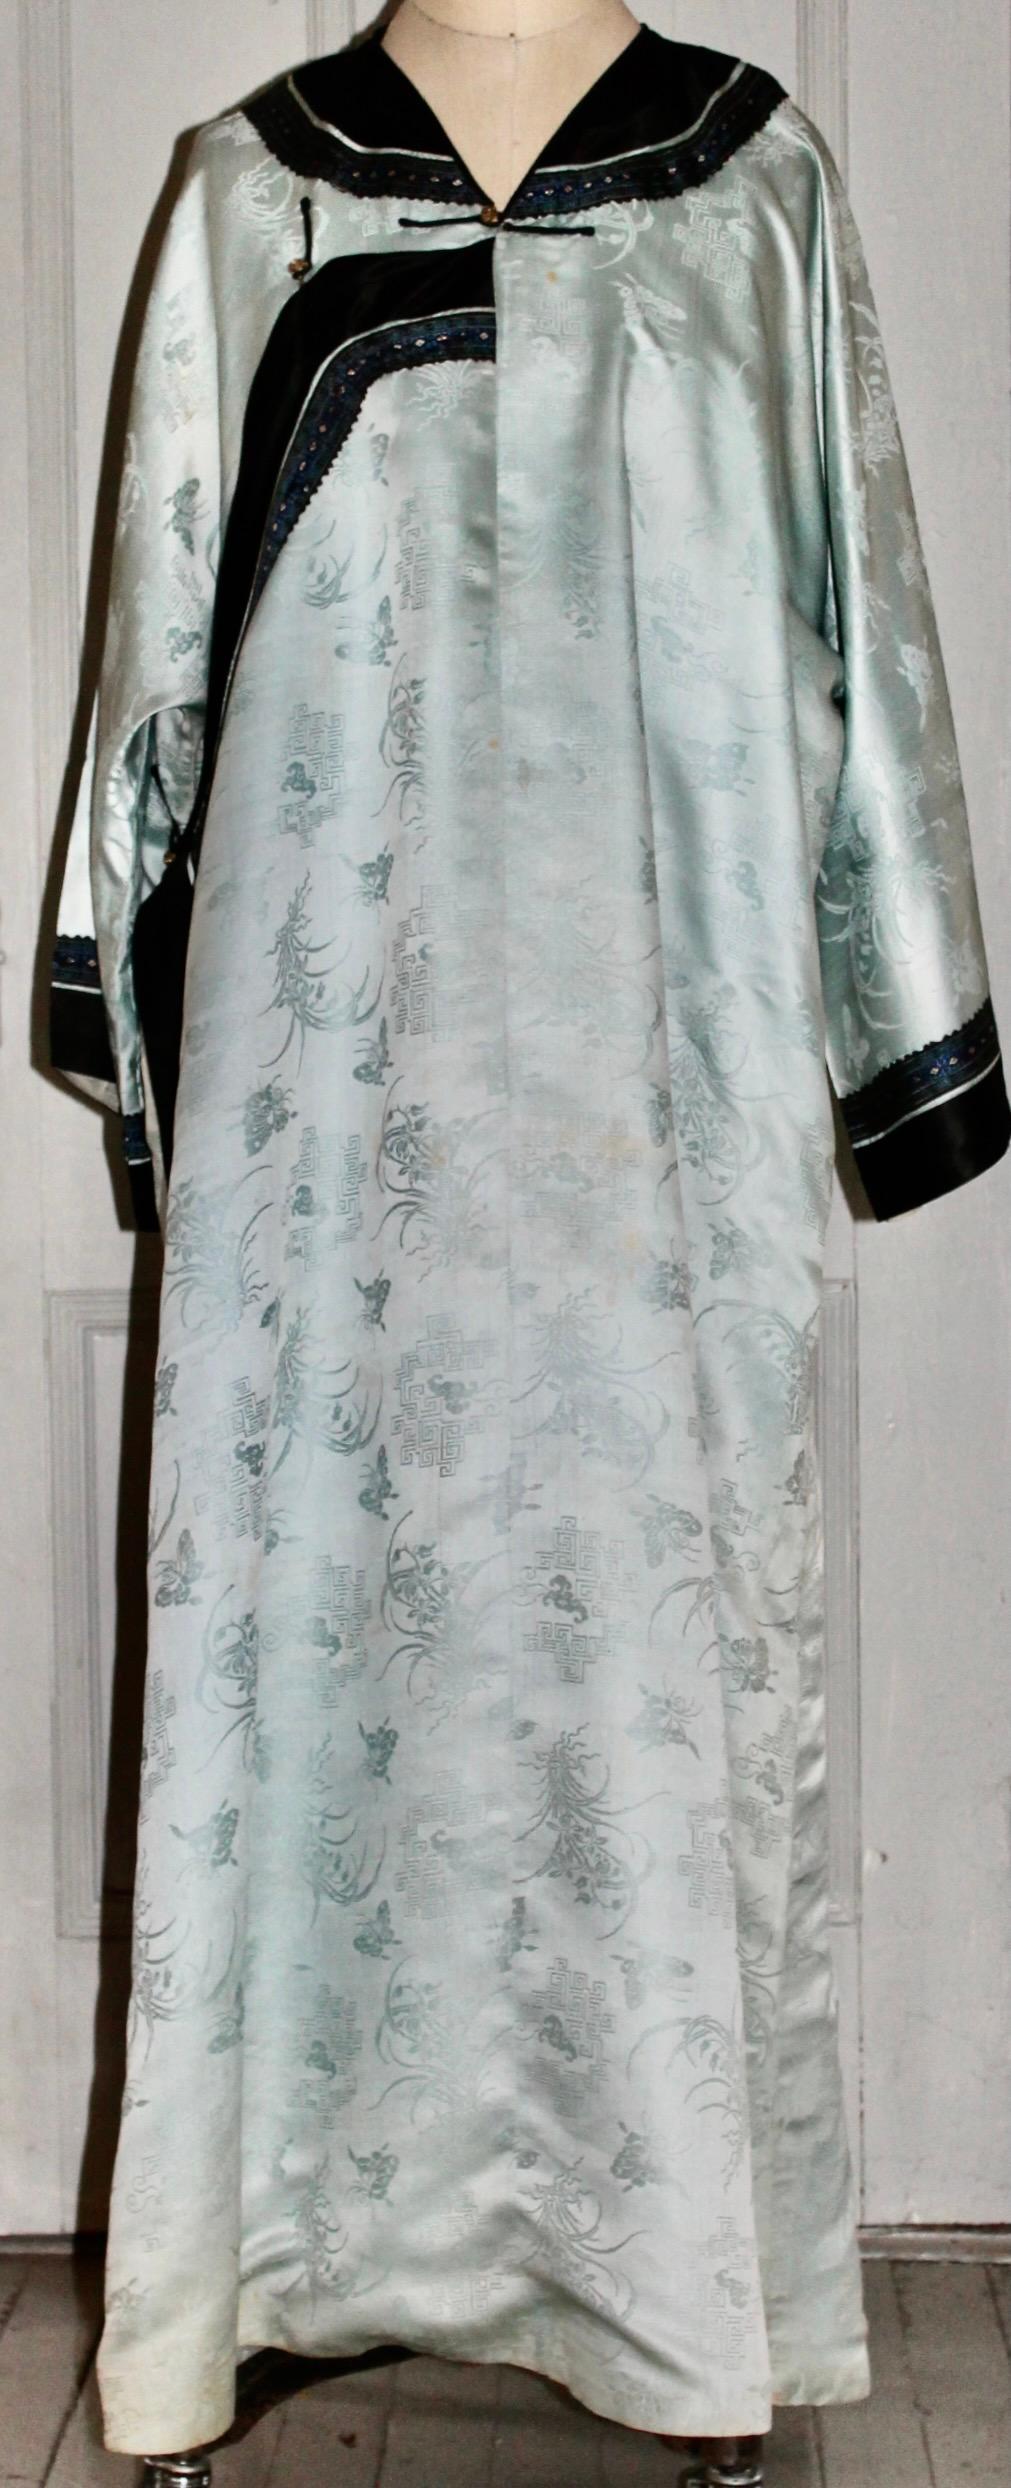 Offering an Antique Chinese Silk Kimono, patterned light blue
silk, with a lining in white silk.  Embroidered applied border at sleeves and neckline.  Total length 52